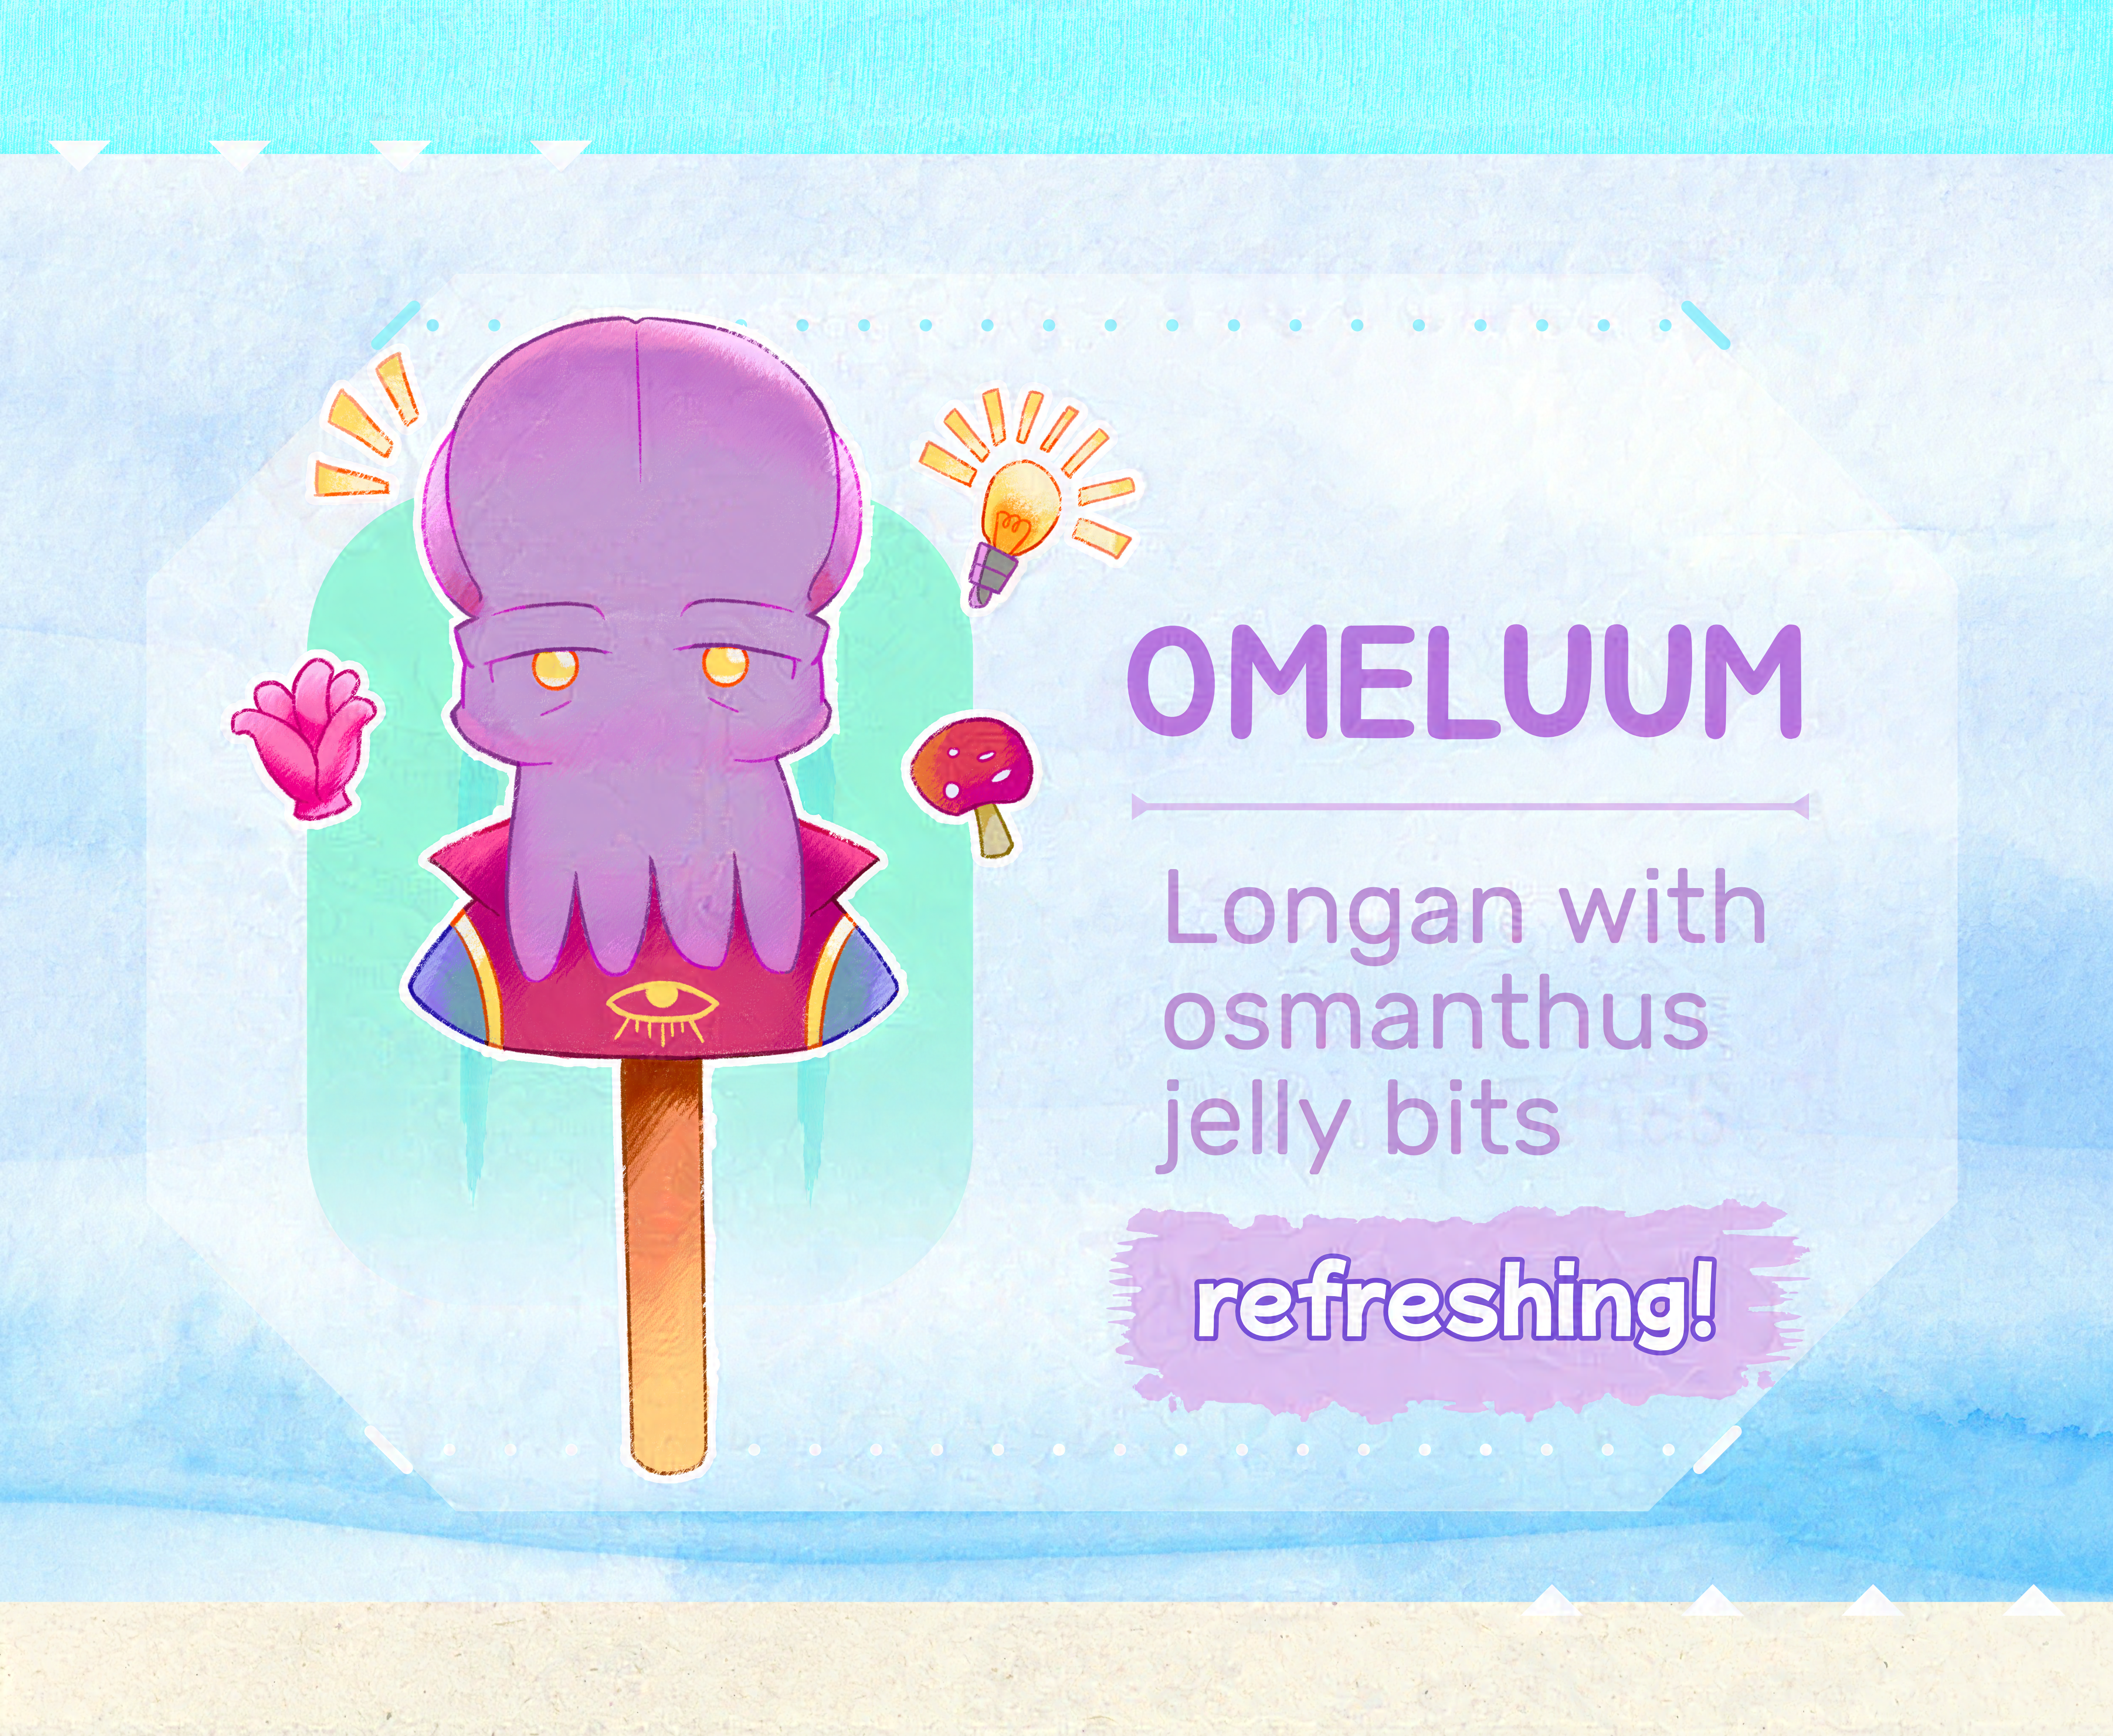 A close-up of the purple Omeluum popsicle, with a ice green round rectangle behind them. They're surrounded a red mushroom, a pink Tongue of Madness herb, a bright lightbulb, and three yellow rectangles next to his head to signify cheerfulness. On their right are the words: 'Omeluum - Longan with osmanthus jelly bits. Refreshing!'